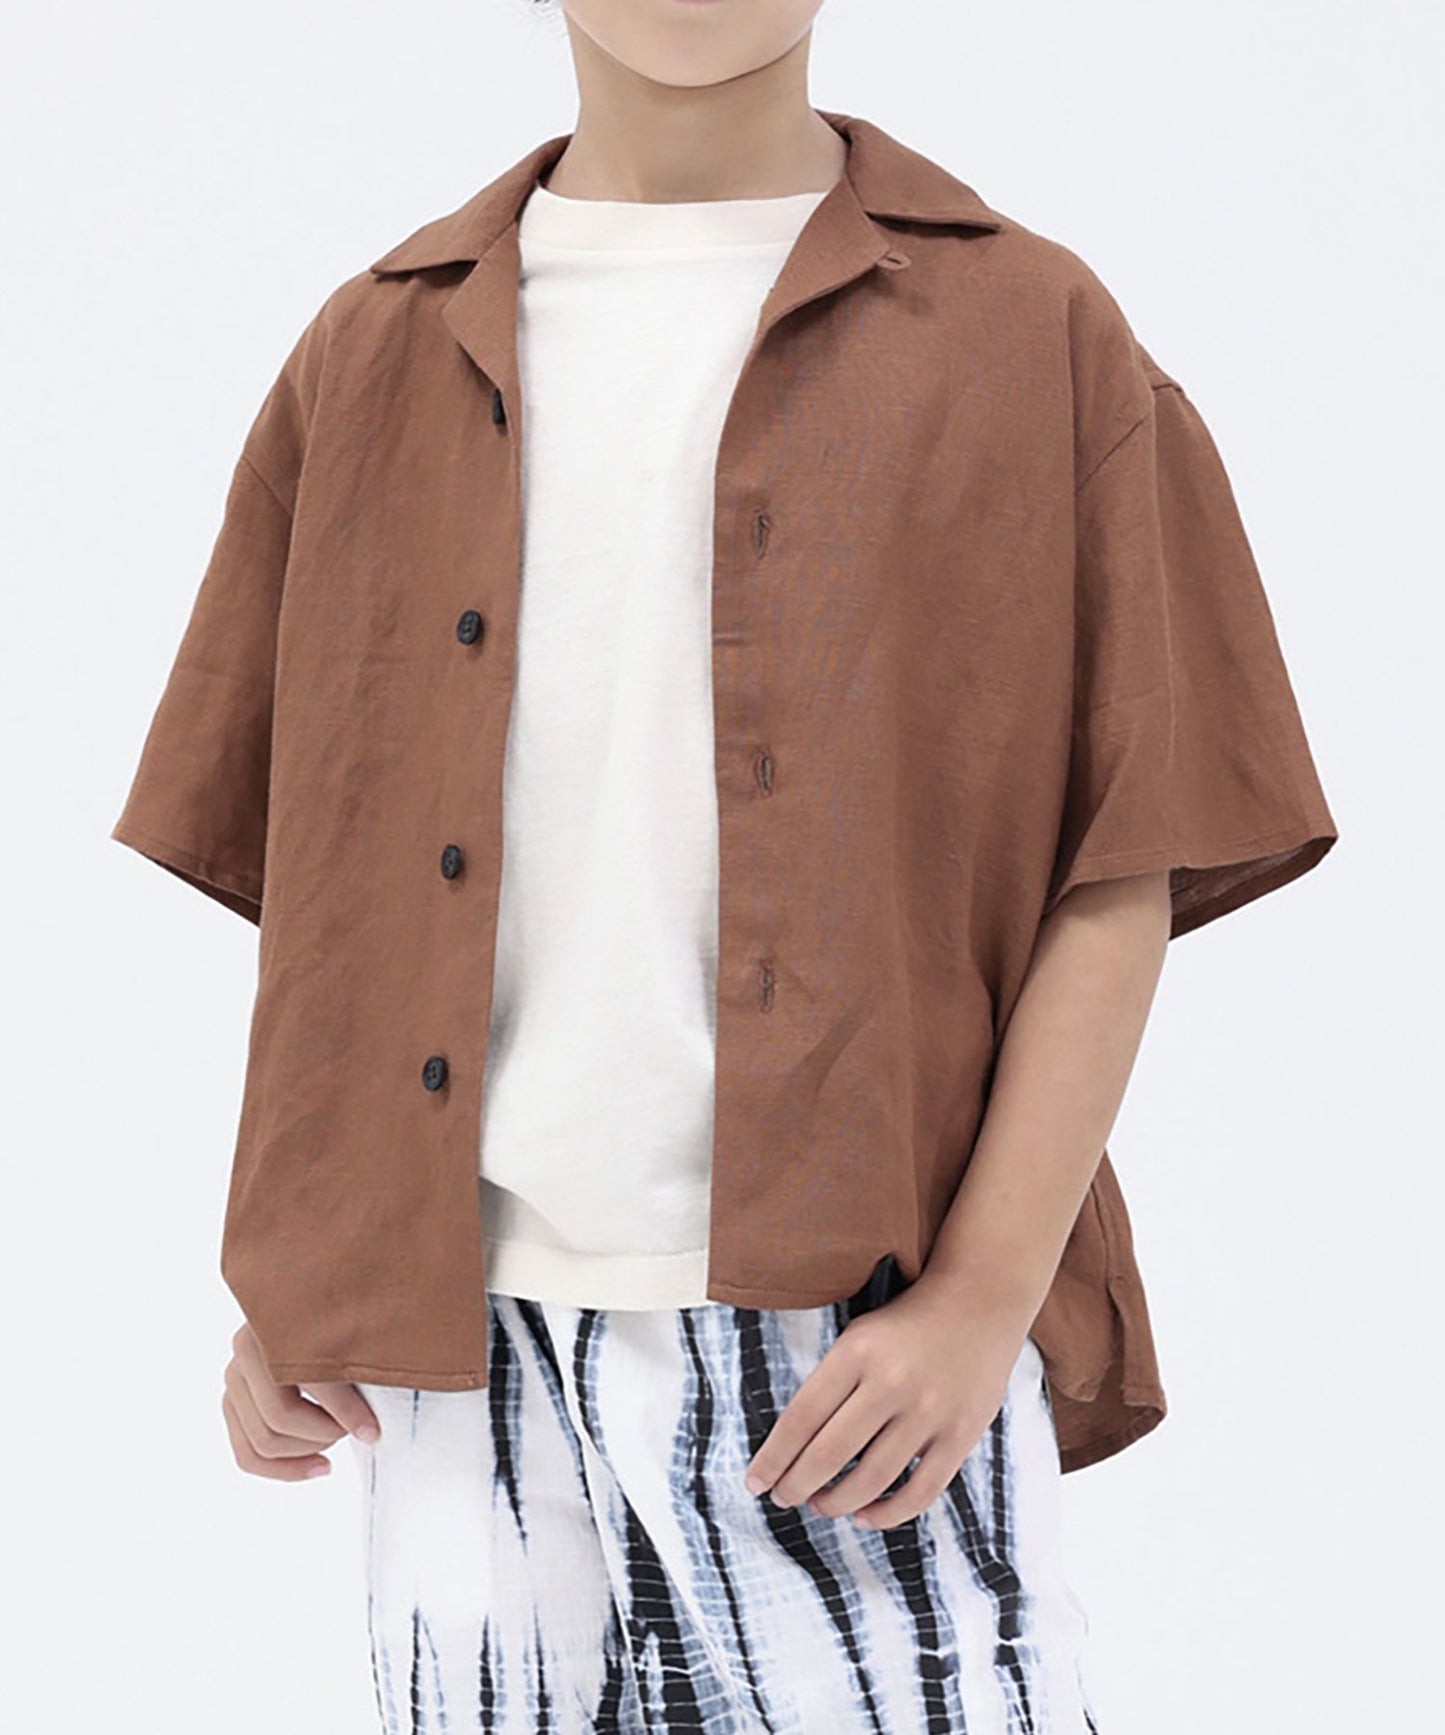 [Environmentally friendly material] LINEN/RAYON OPEN COLLAR SHIRT Cool touch feeling On/off use Setup compatible [100-145cm]